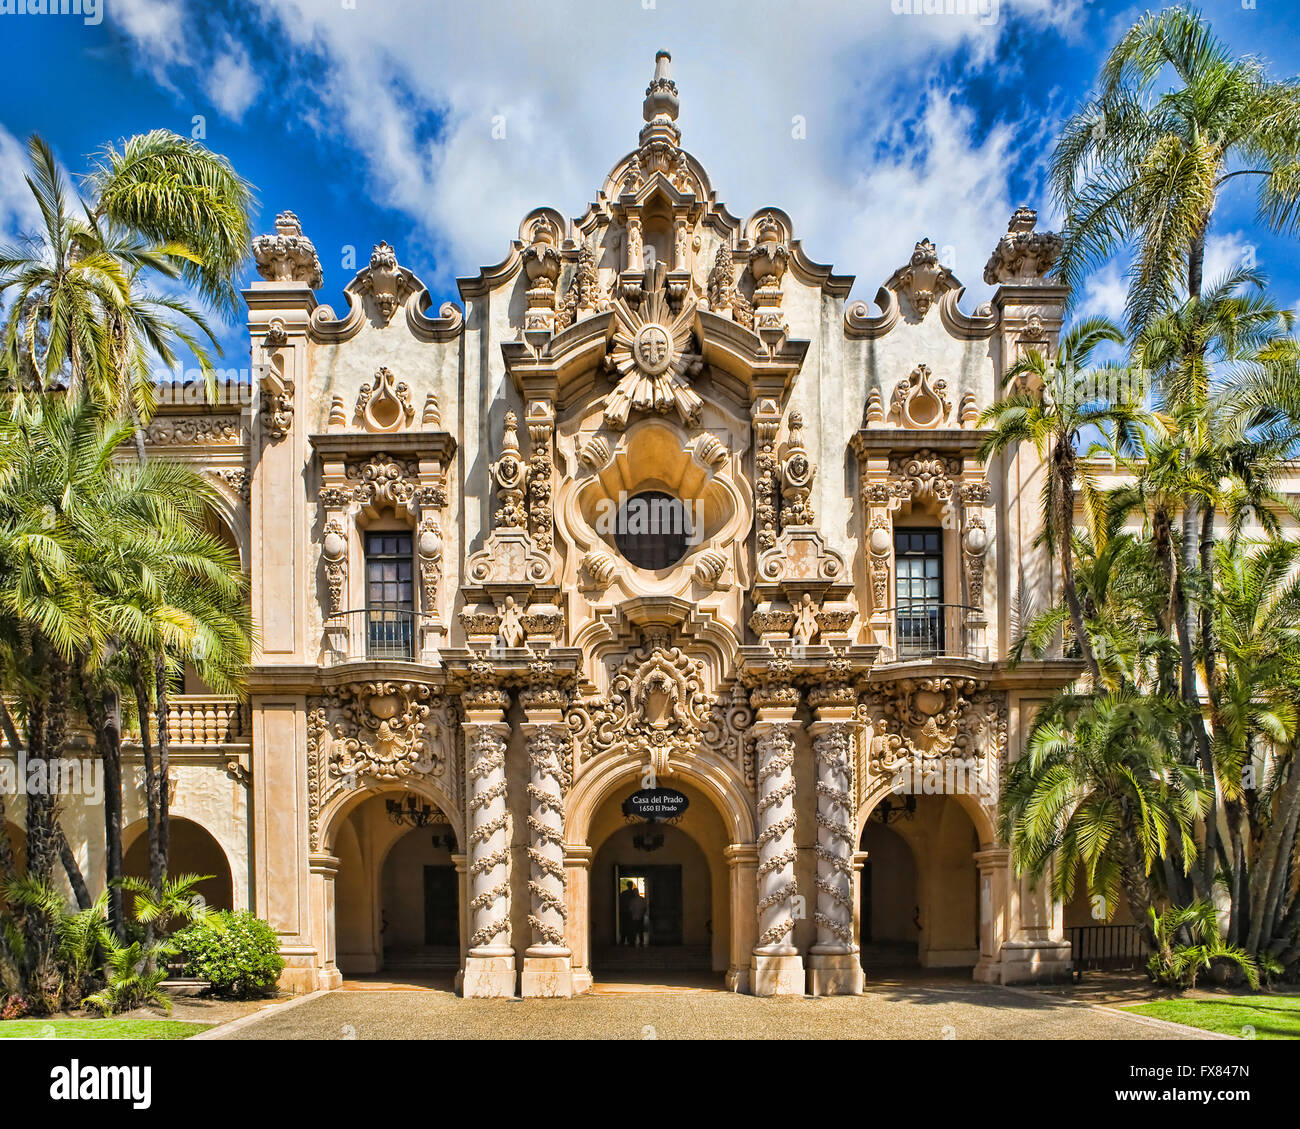 Spanish architecture:  Casa del Prado in Balboa Park, San Diego CA.  This significant horticultural and cultural resource has mo Stock Photo